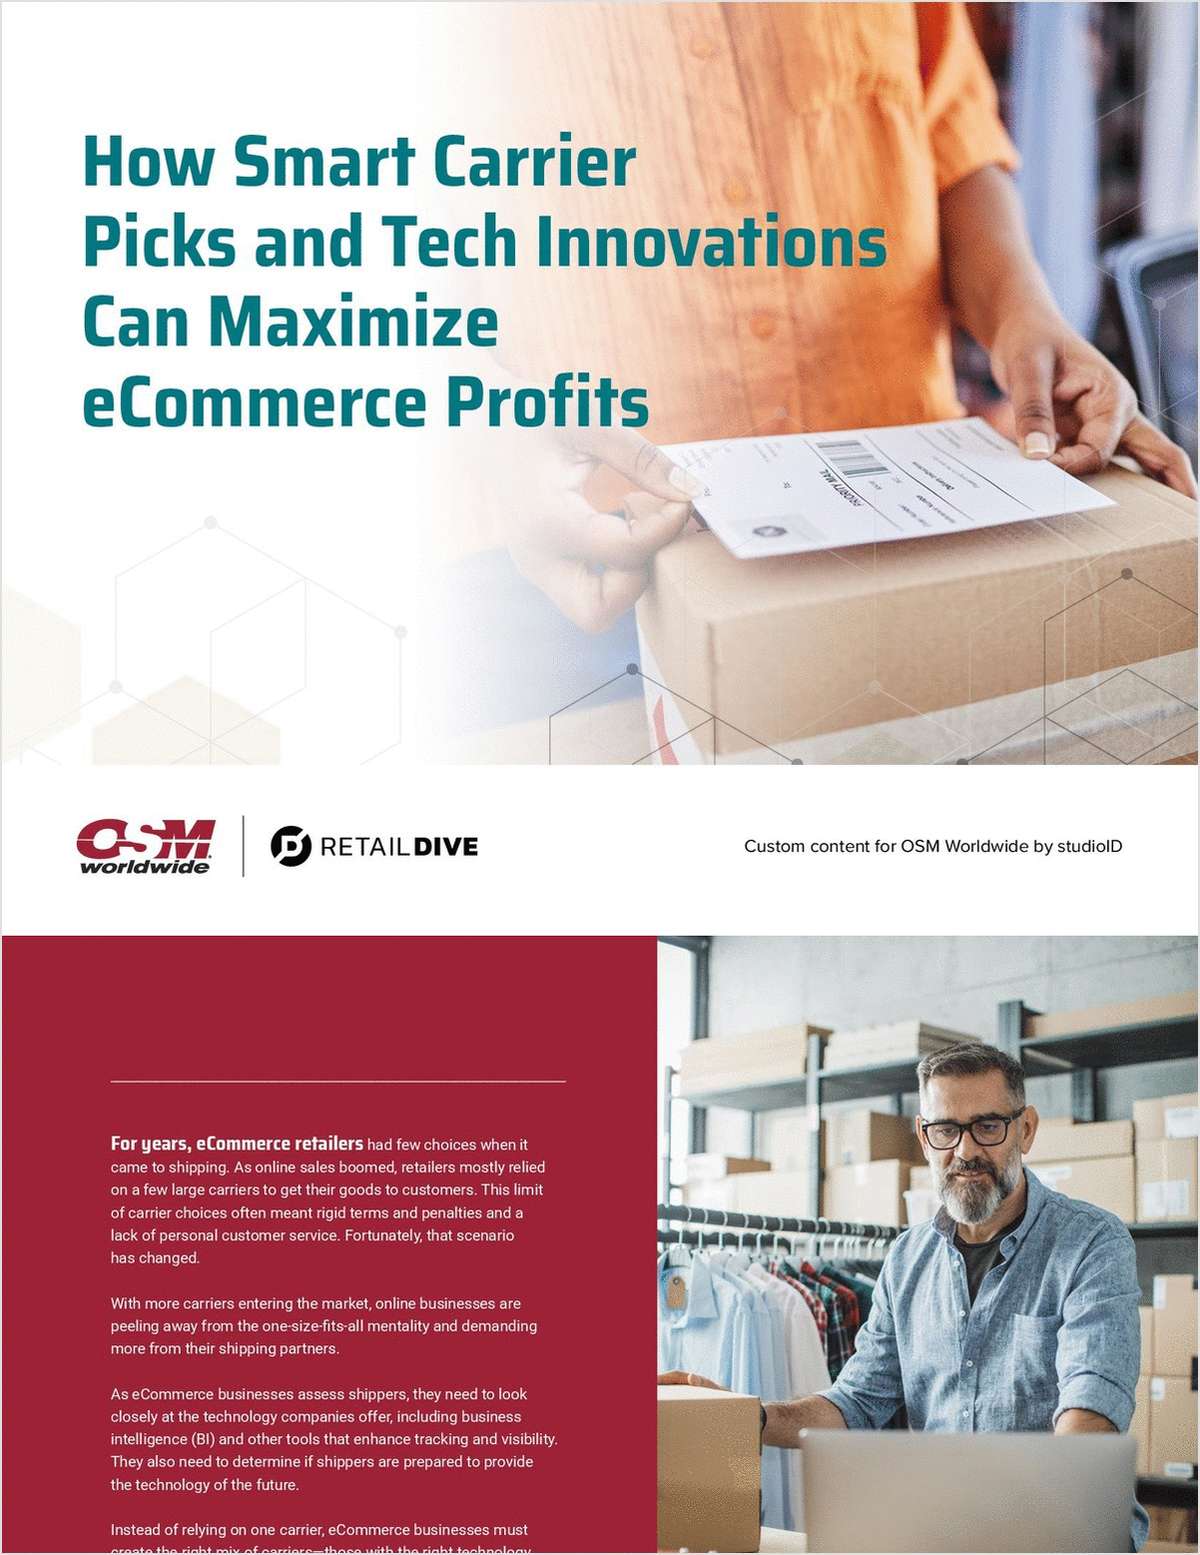 How Smart Carrier Picks and Tech Innovations Can Maximize eCommerce Profits